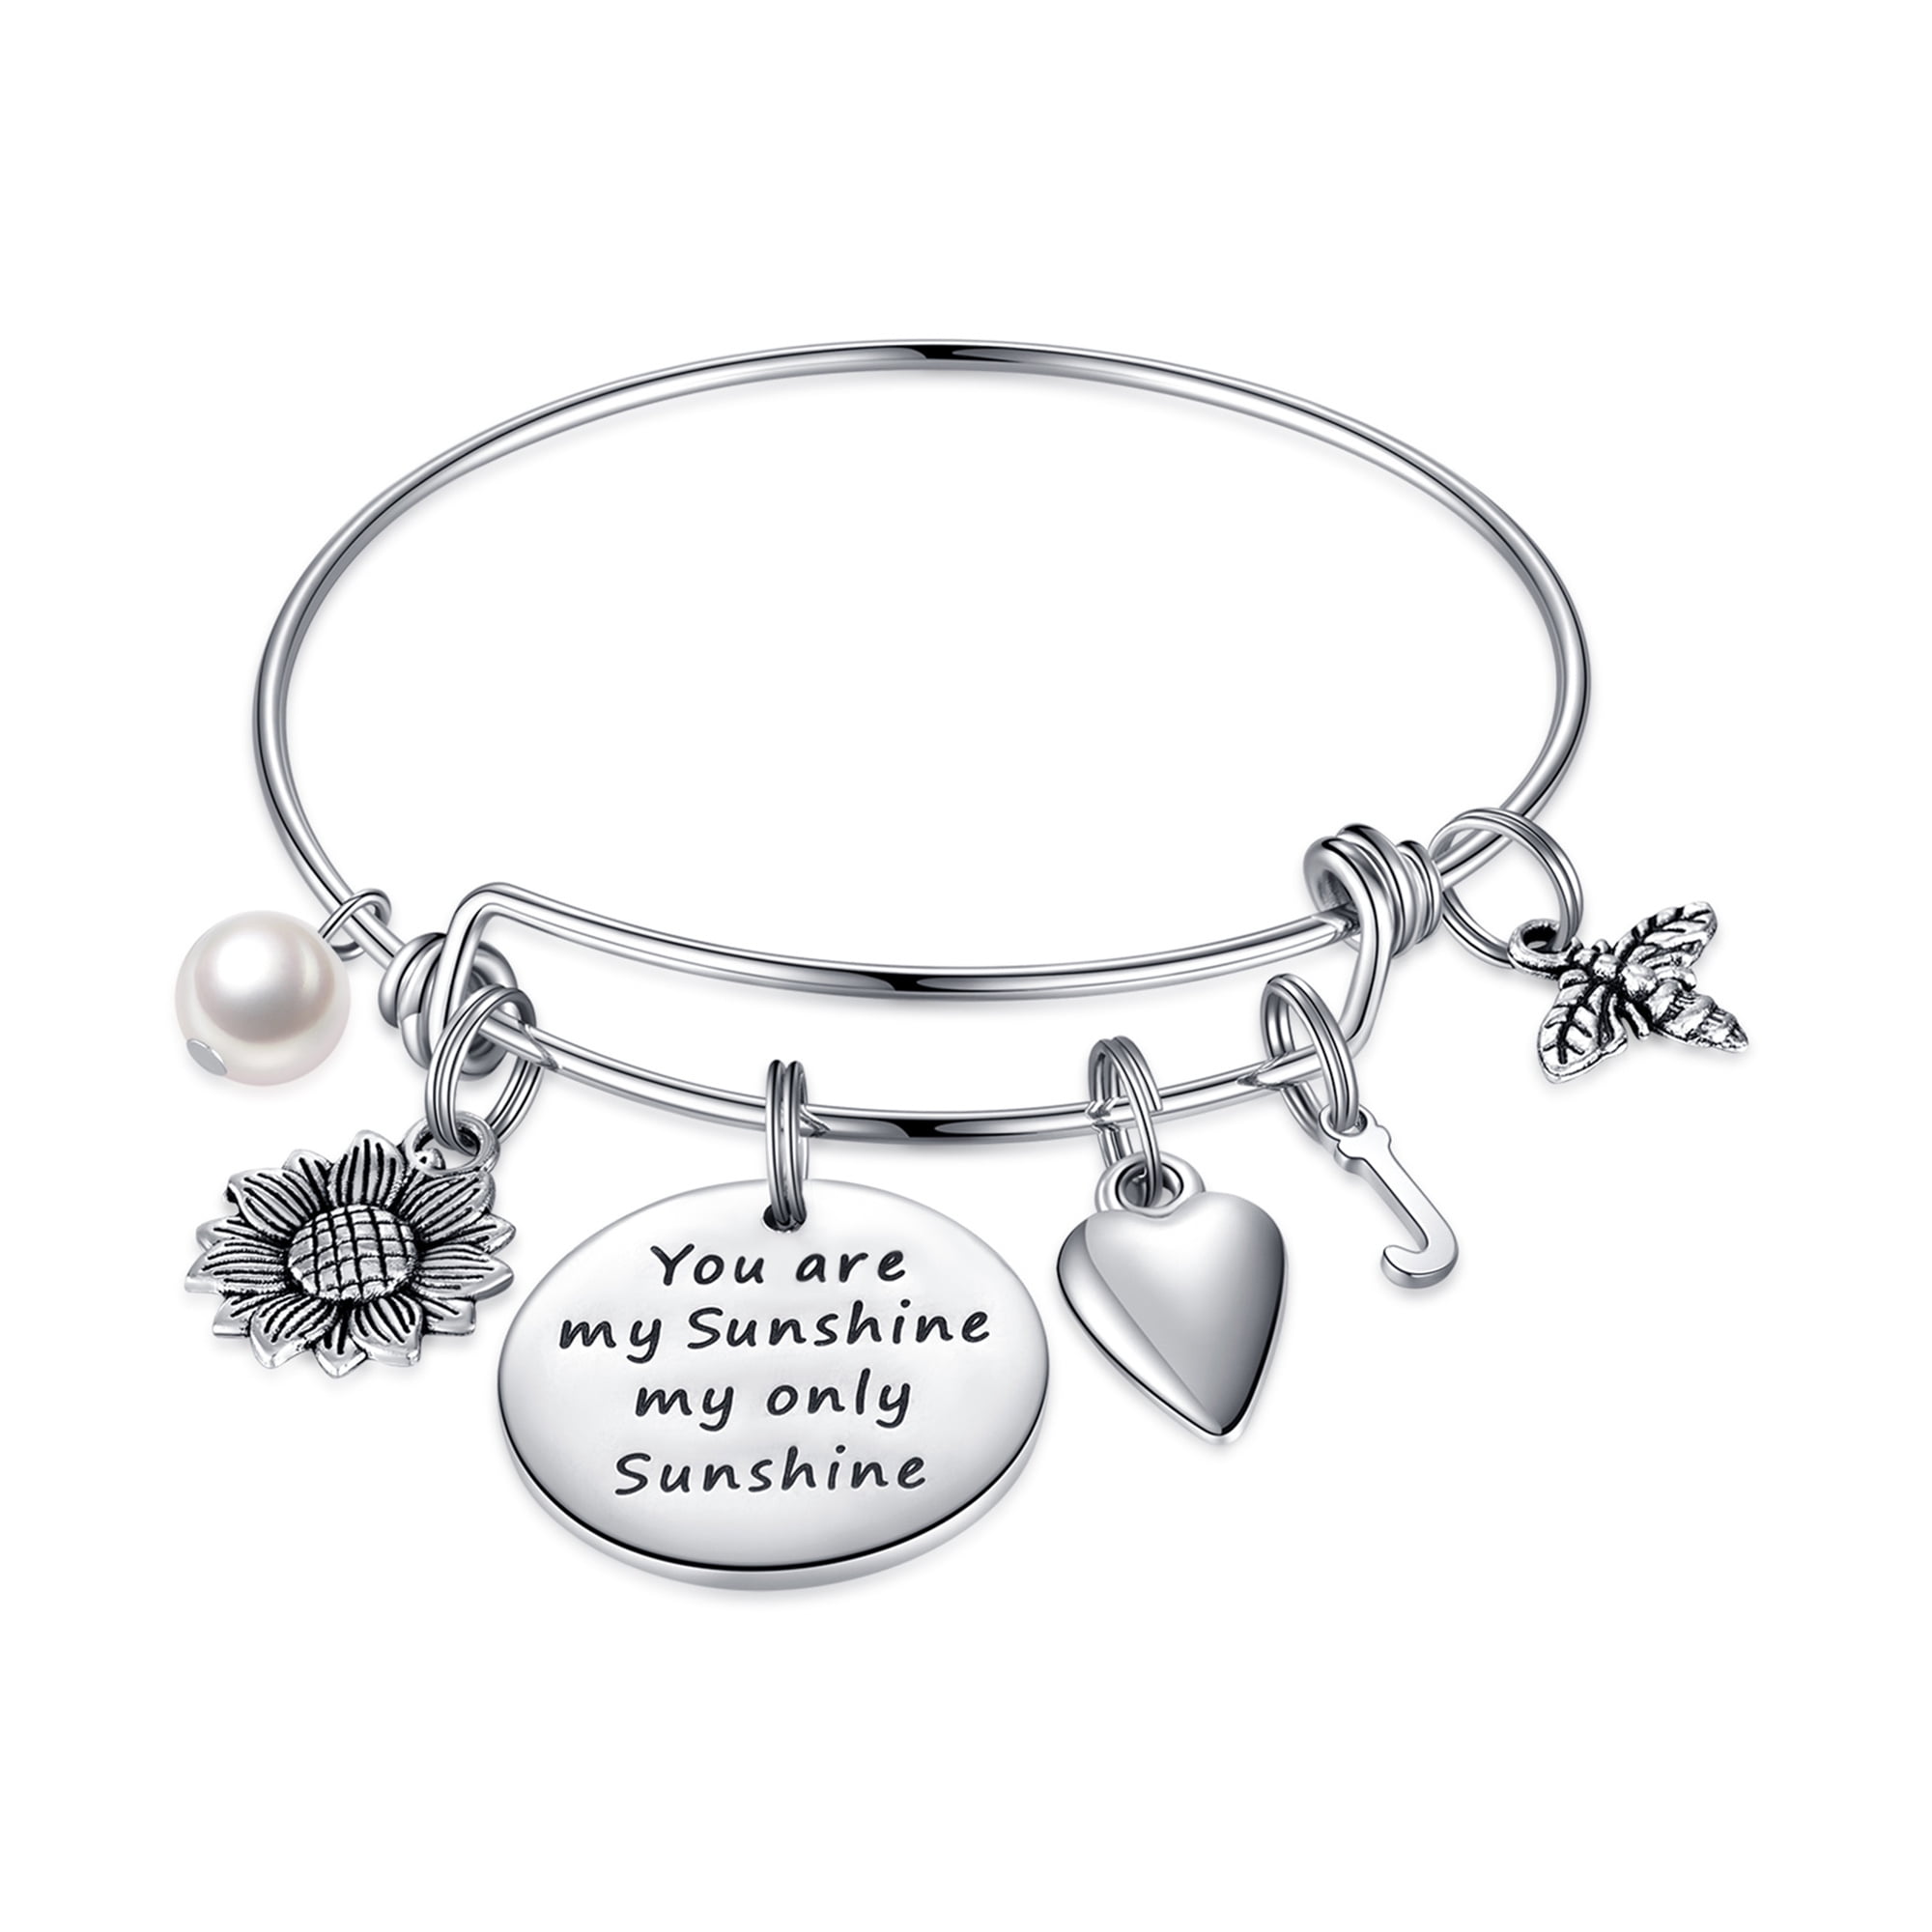 Keep Fucking Going Inspirational Bracelets Funny Gifts for Her for Women  Quote Jewelry Friend Encouragement Empowerment Mantra Cuff Bangle – Joycuff